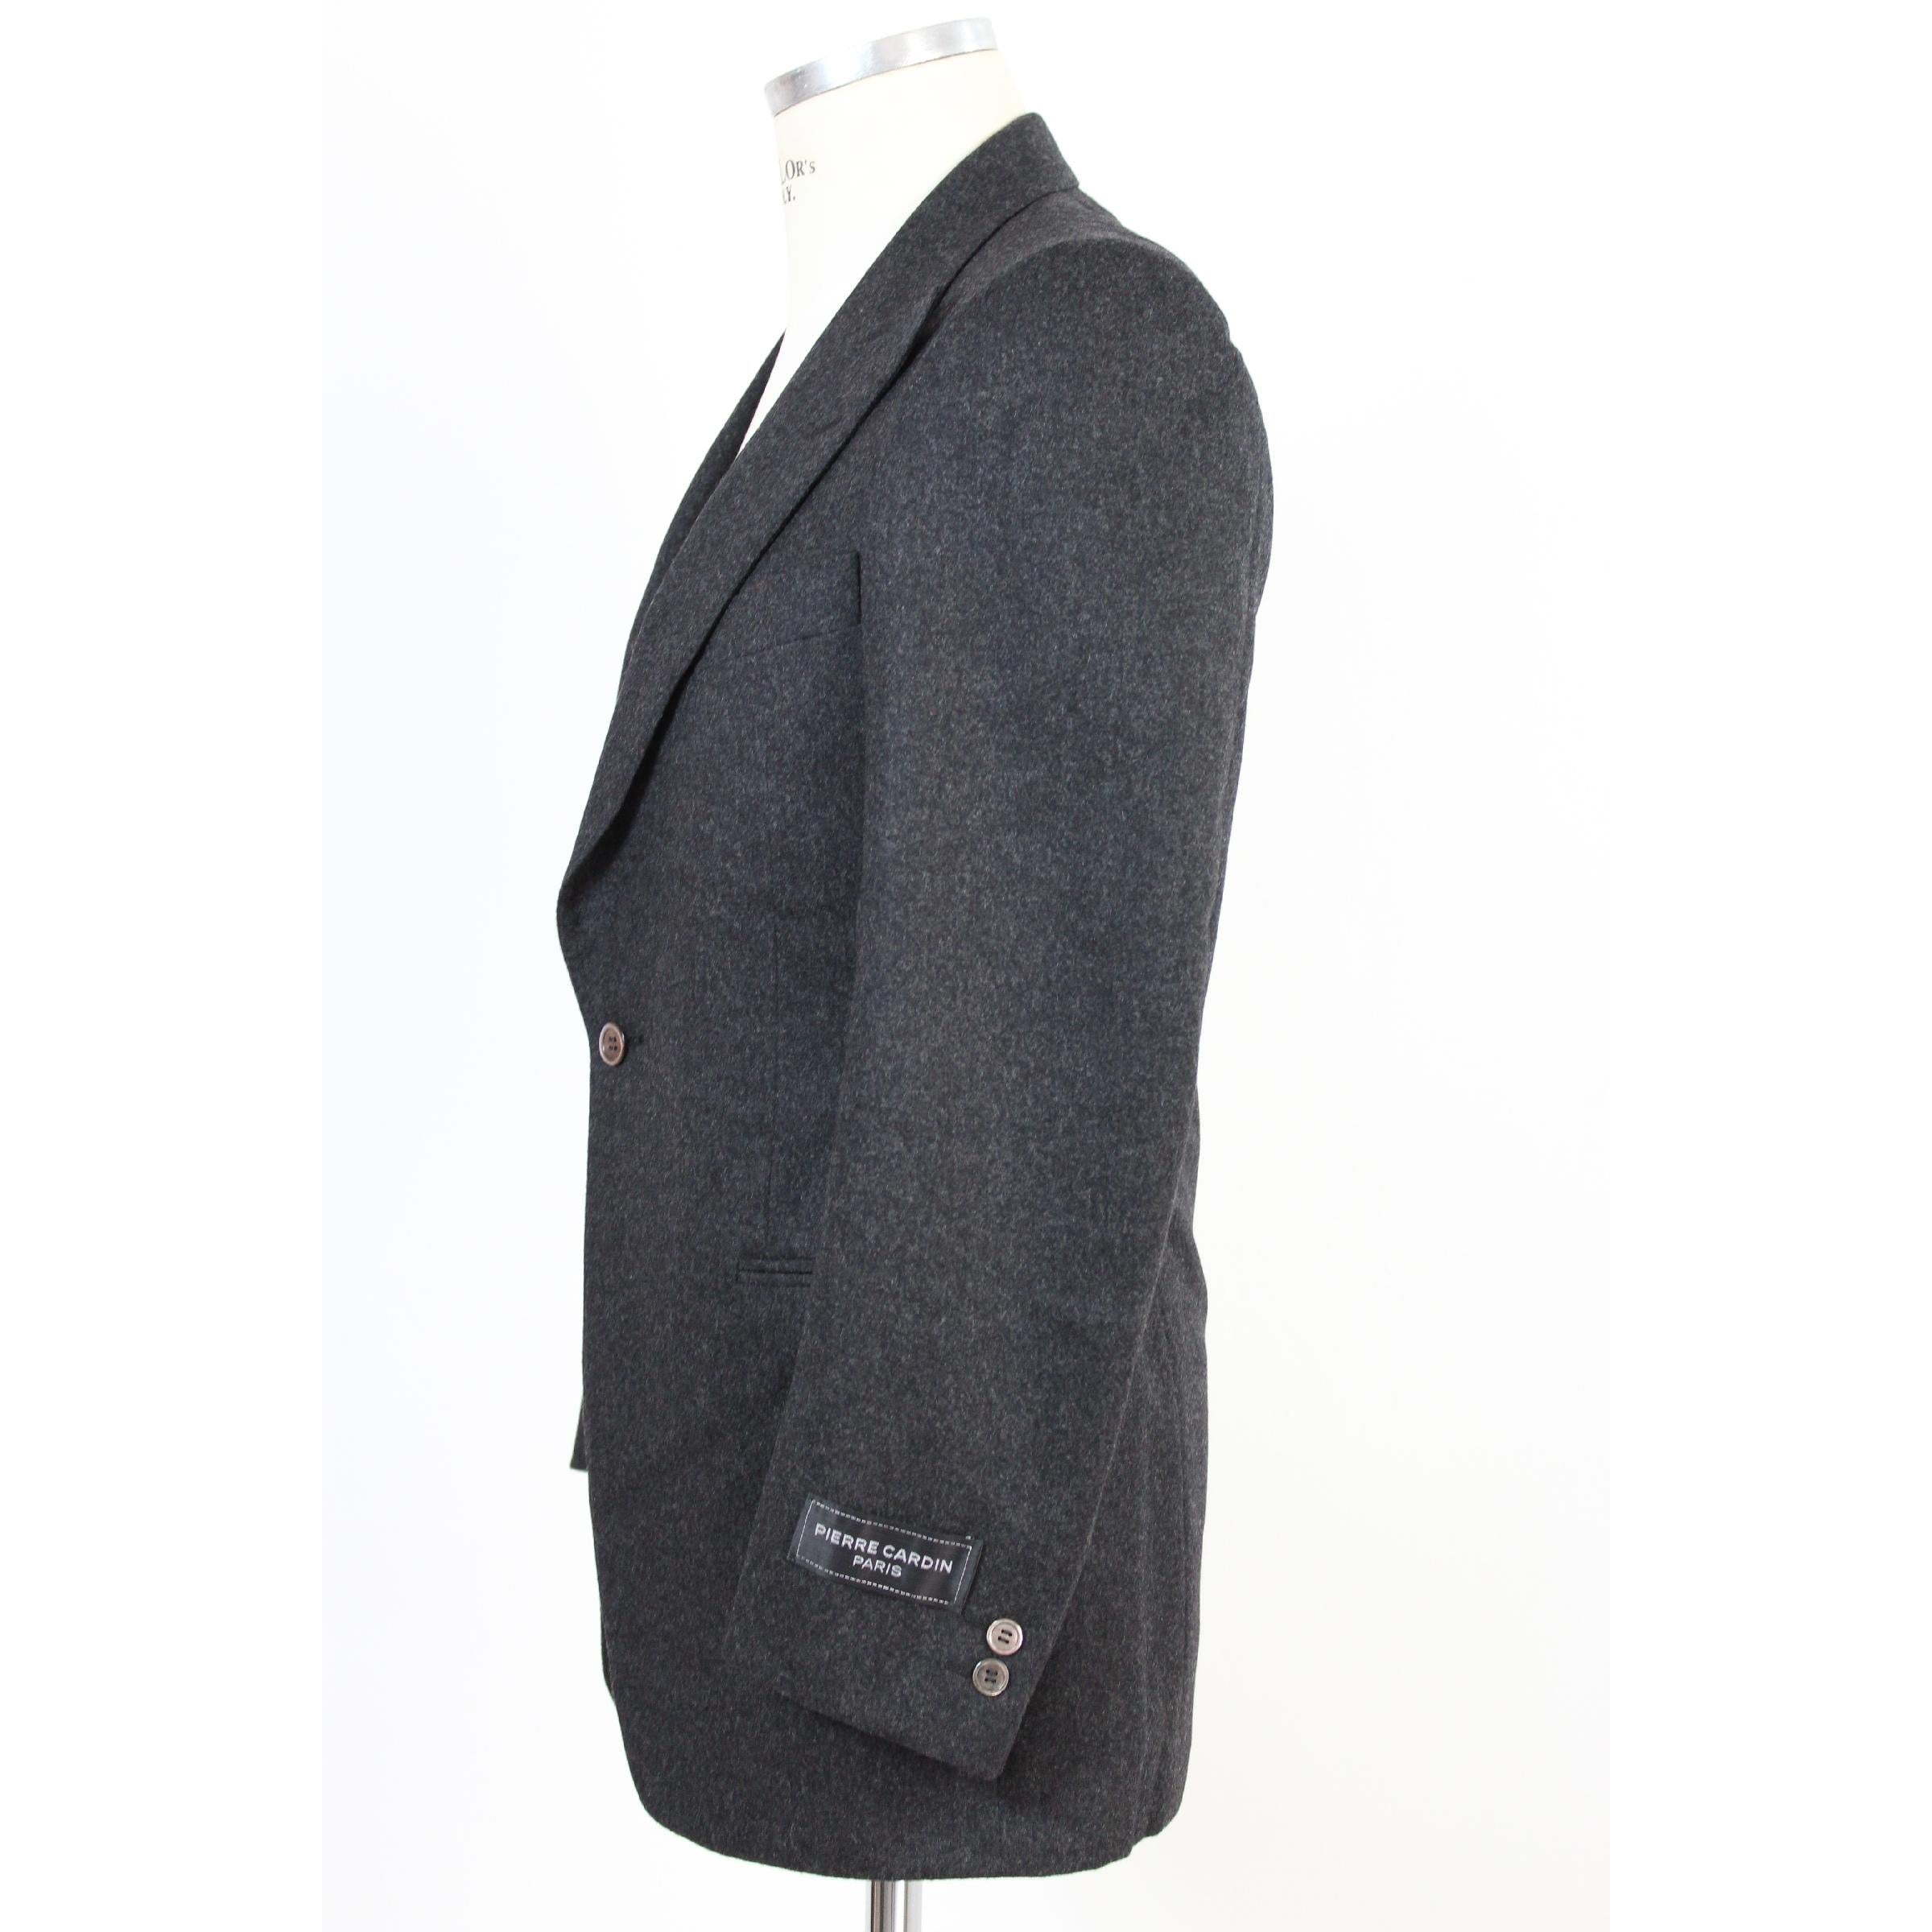 1990s Pierre Cardin Black Wool Tuxedo Suit Pants Size 36 In New Condition For Sale In Brindisi, Bt